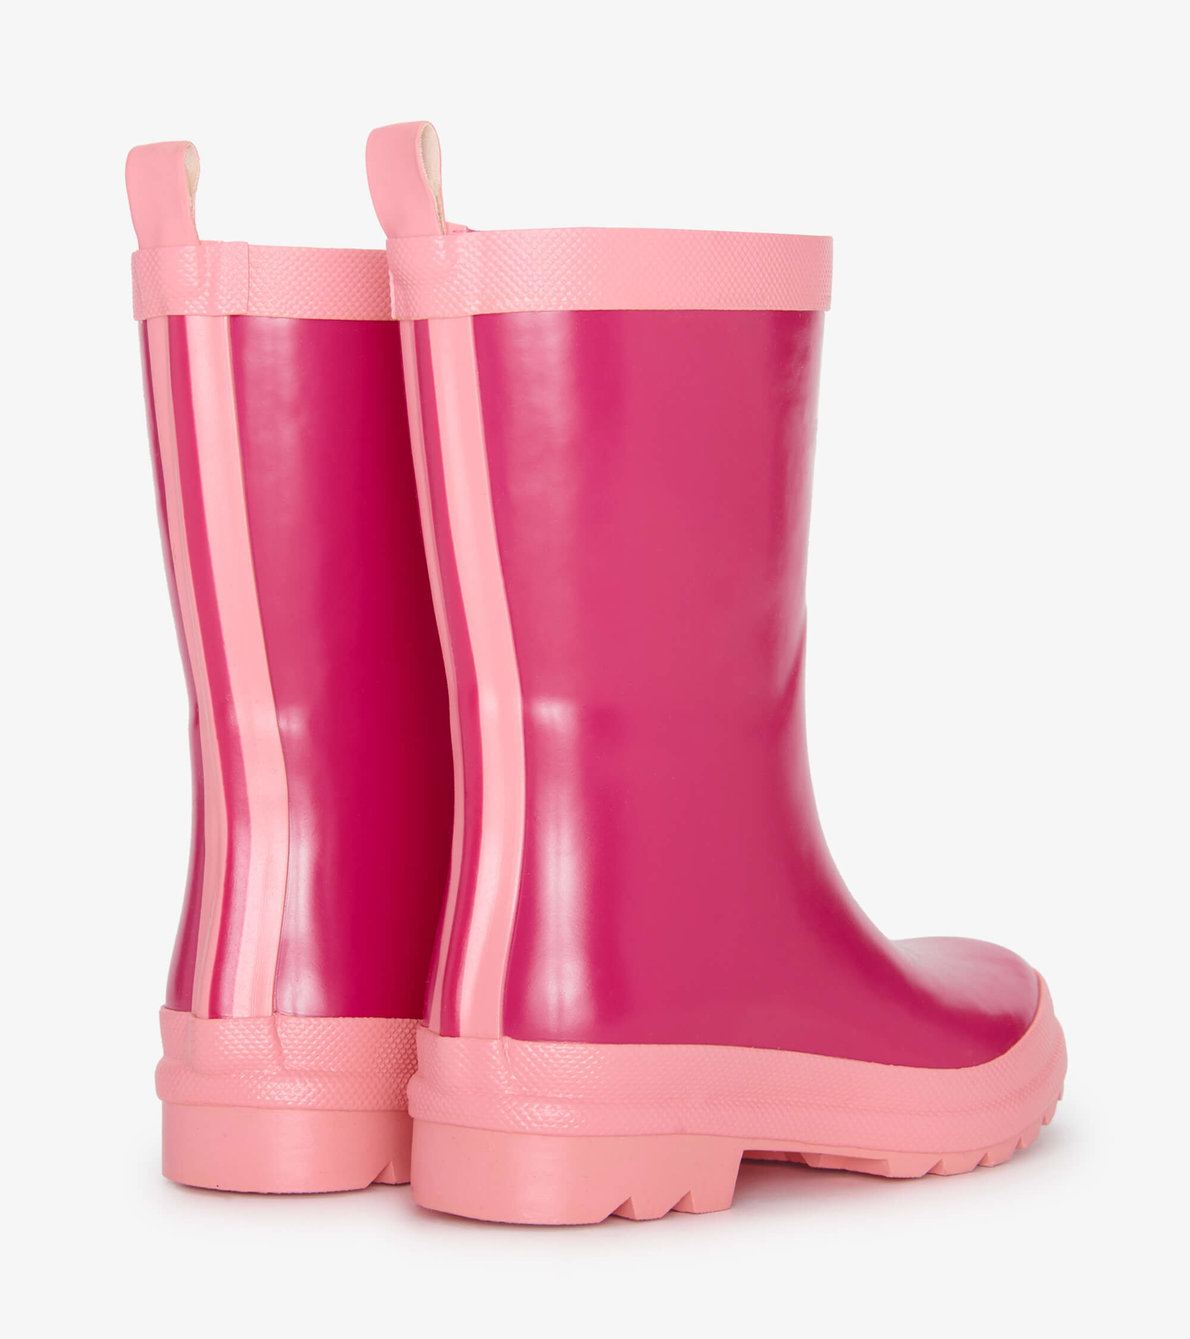 View larger image of Pink Shiny Wellies